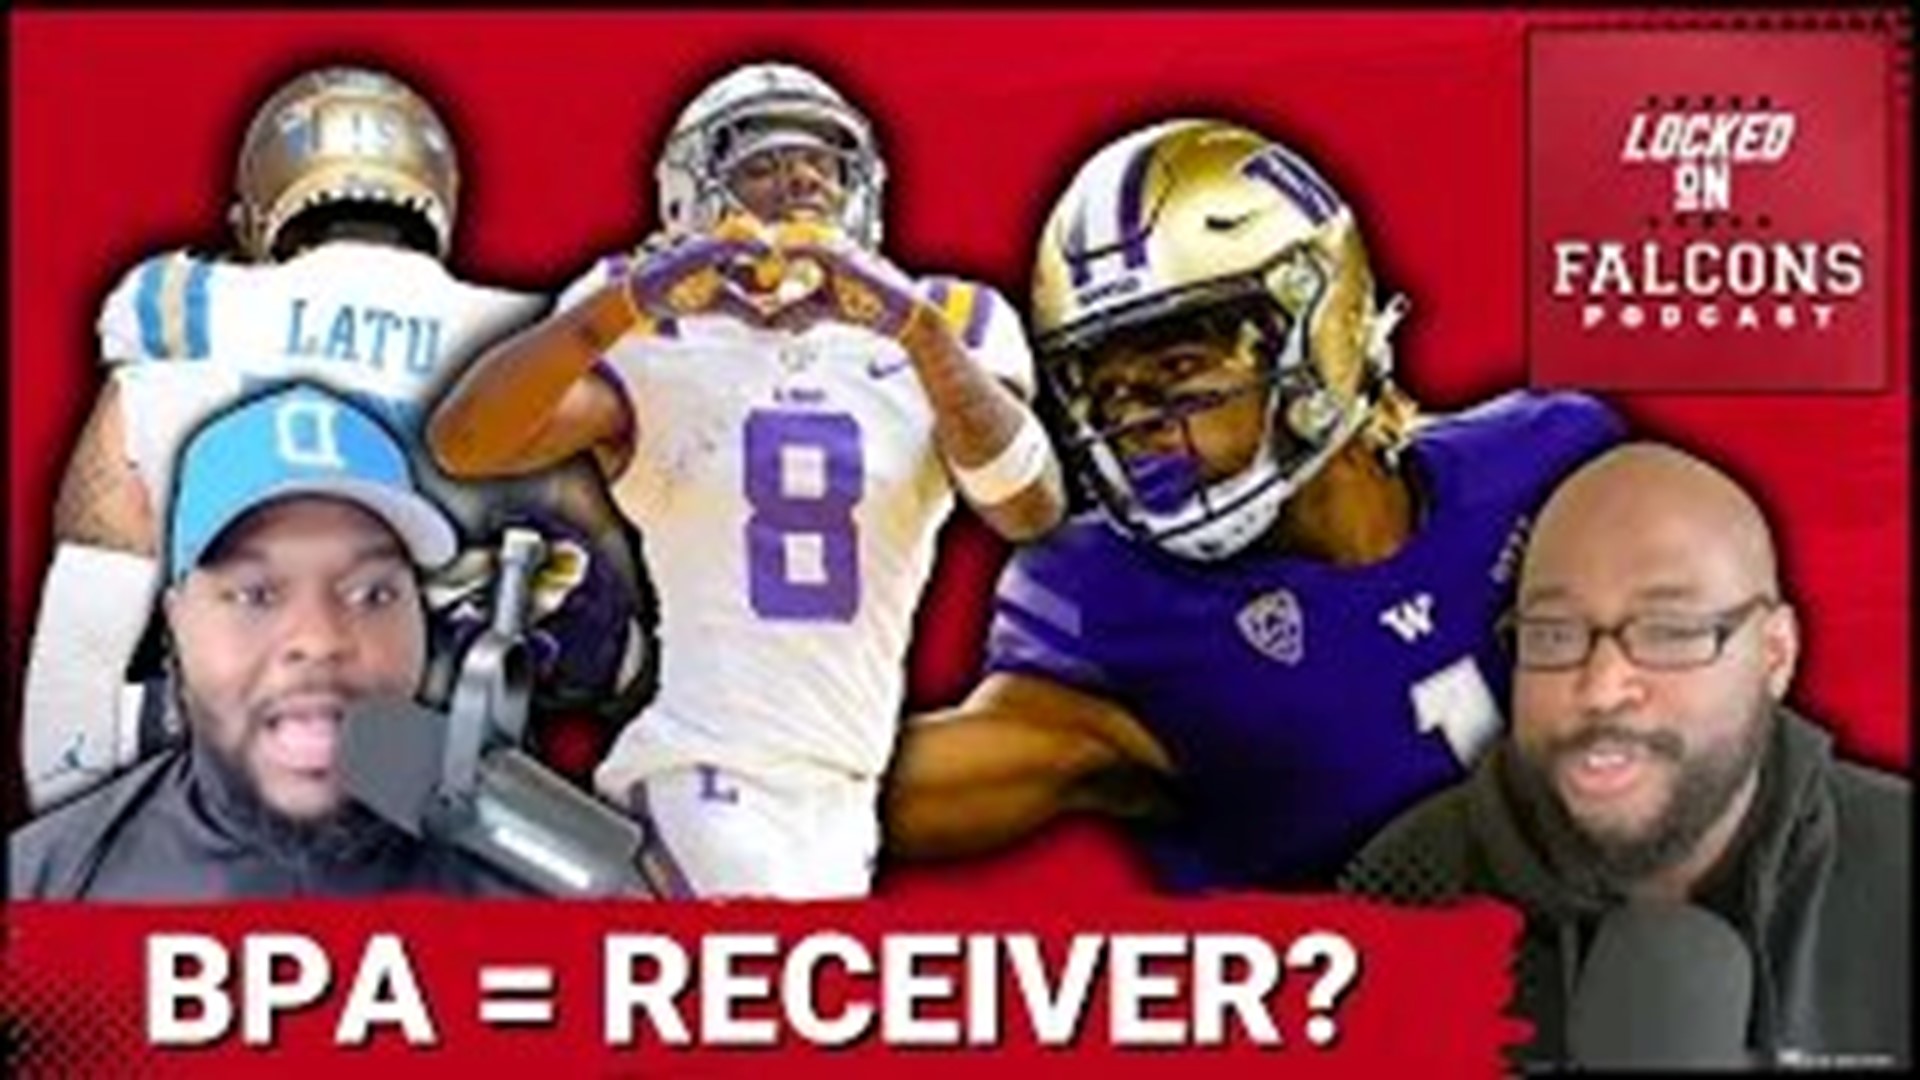 The Atlanta Falcons believe in a "best player available" draft strategy and host Aaron Freeman and guest Damian Parson discuss whether that pushes them to WR.